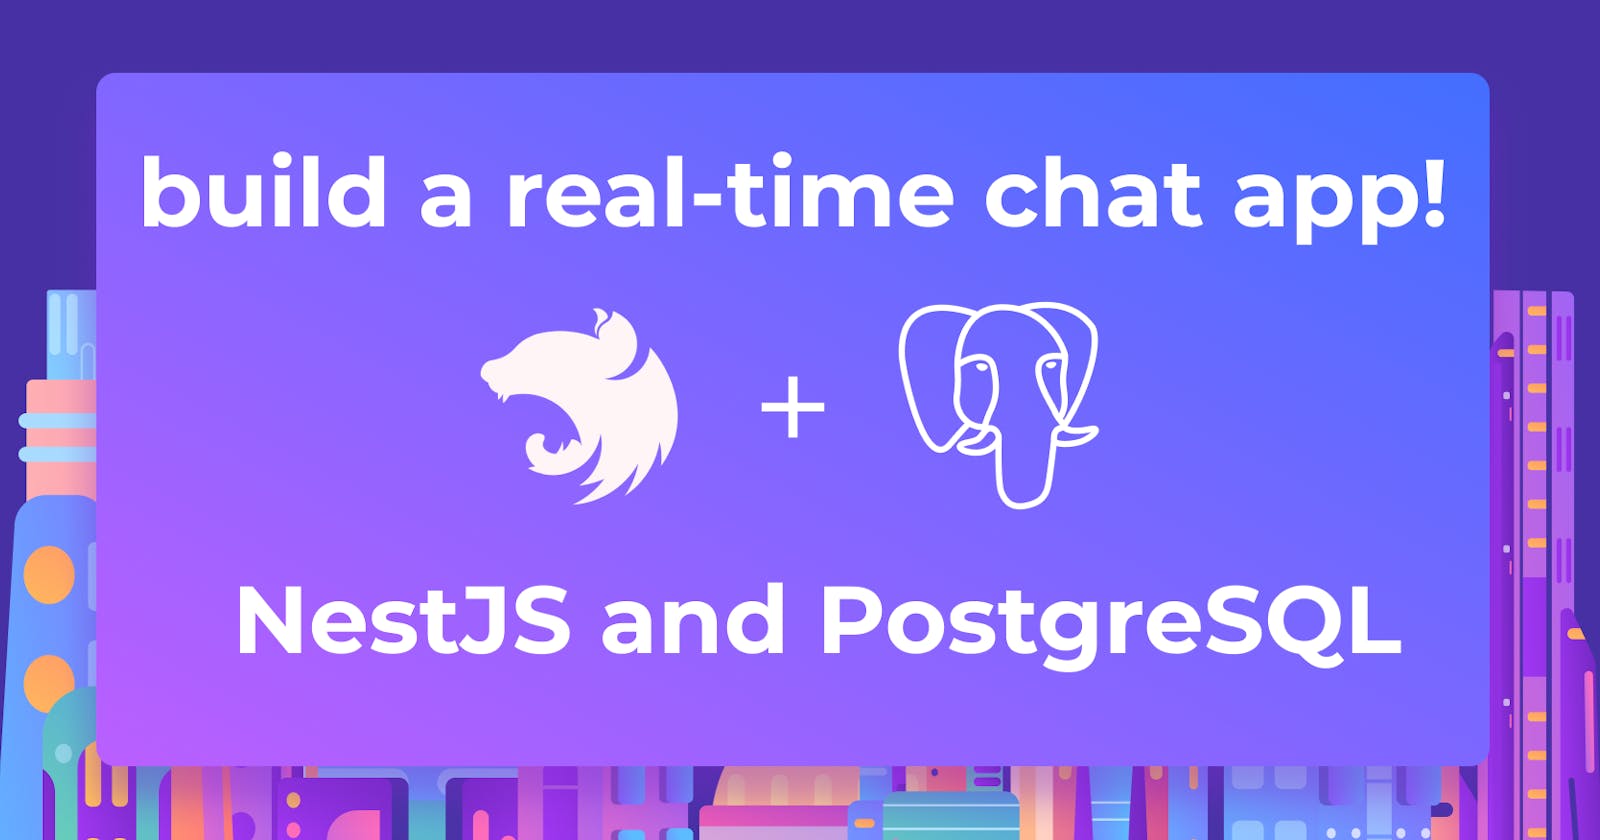 Build a real-time chat application with Nestjs and PostgreSQL